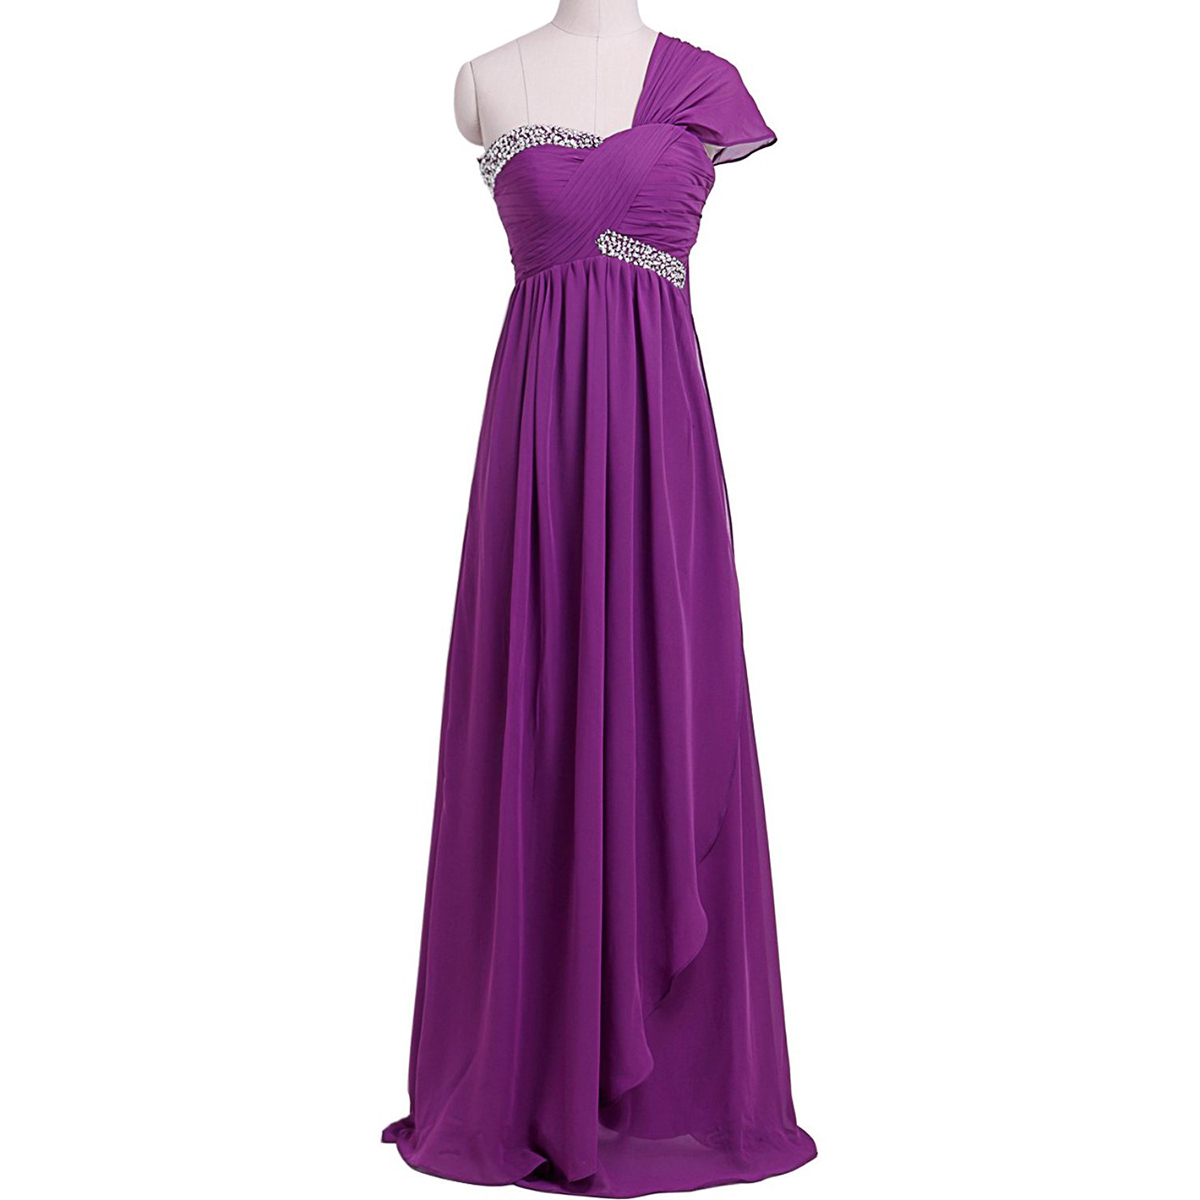 Lilac Floor Length Chiffon A-Line Pleated Prom Dress Featuring Beaded Embellished Ruched Sweetheart Bodice with One Shoulder Cap Sleeve 